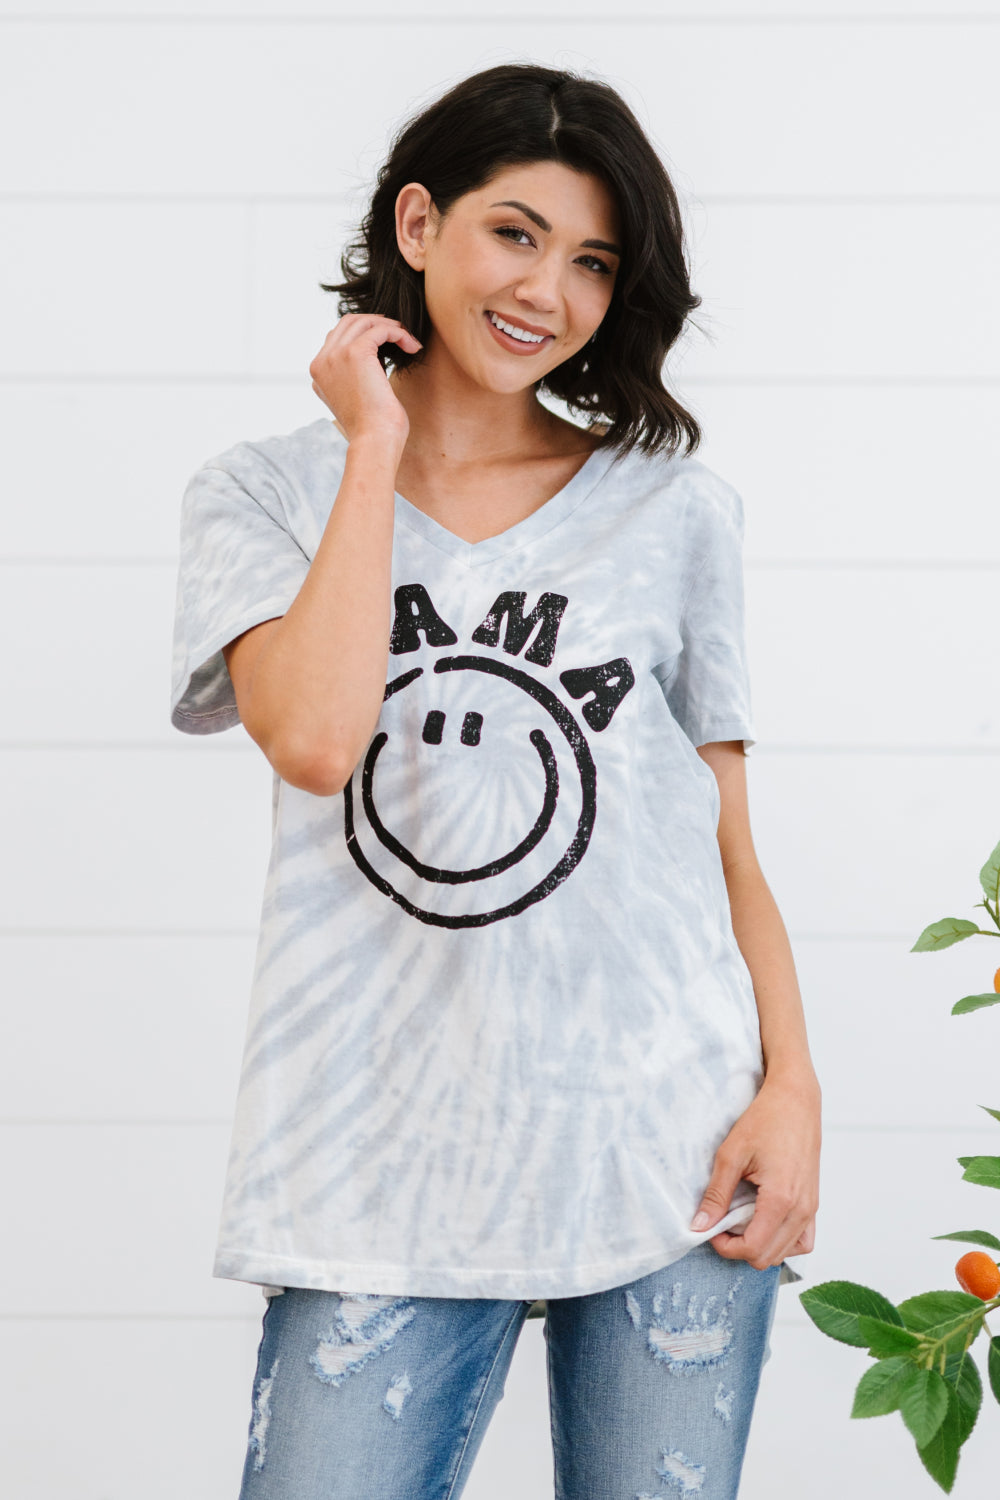 MAMA Smiley Face Graphic Tie-Dye Tee Shirt Gray S 